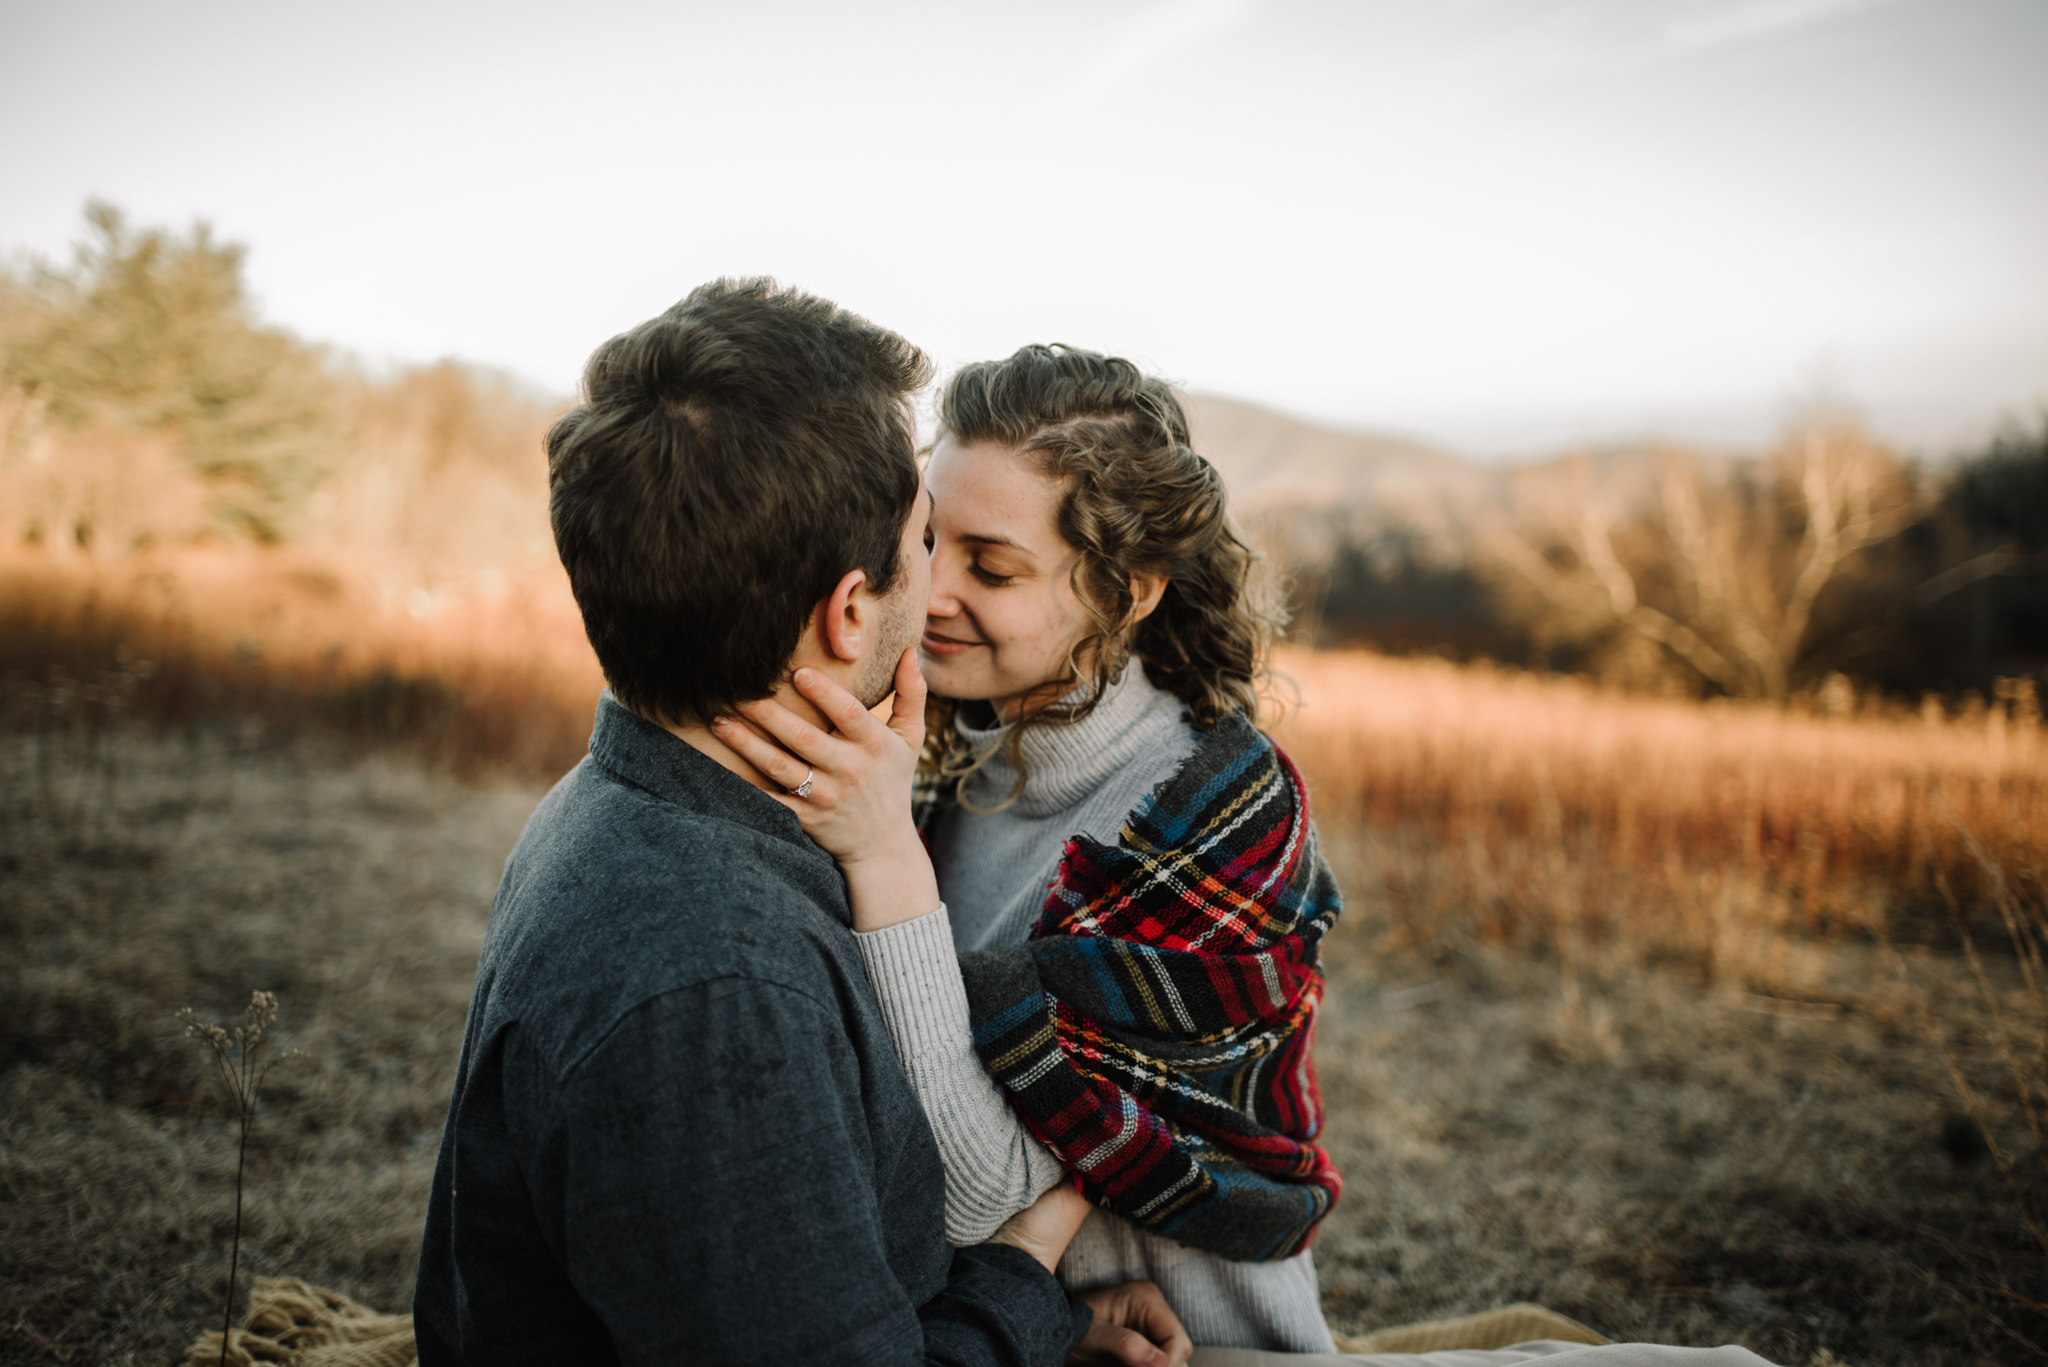 Alli and Mitchell - Shenandoah National Park Adventure Winter Engagement Session on Skyline Drive - White Sails Creative Elopement Photography_39.JPG